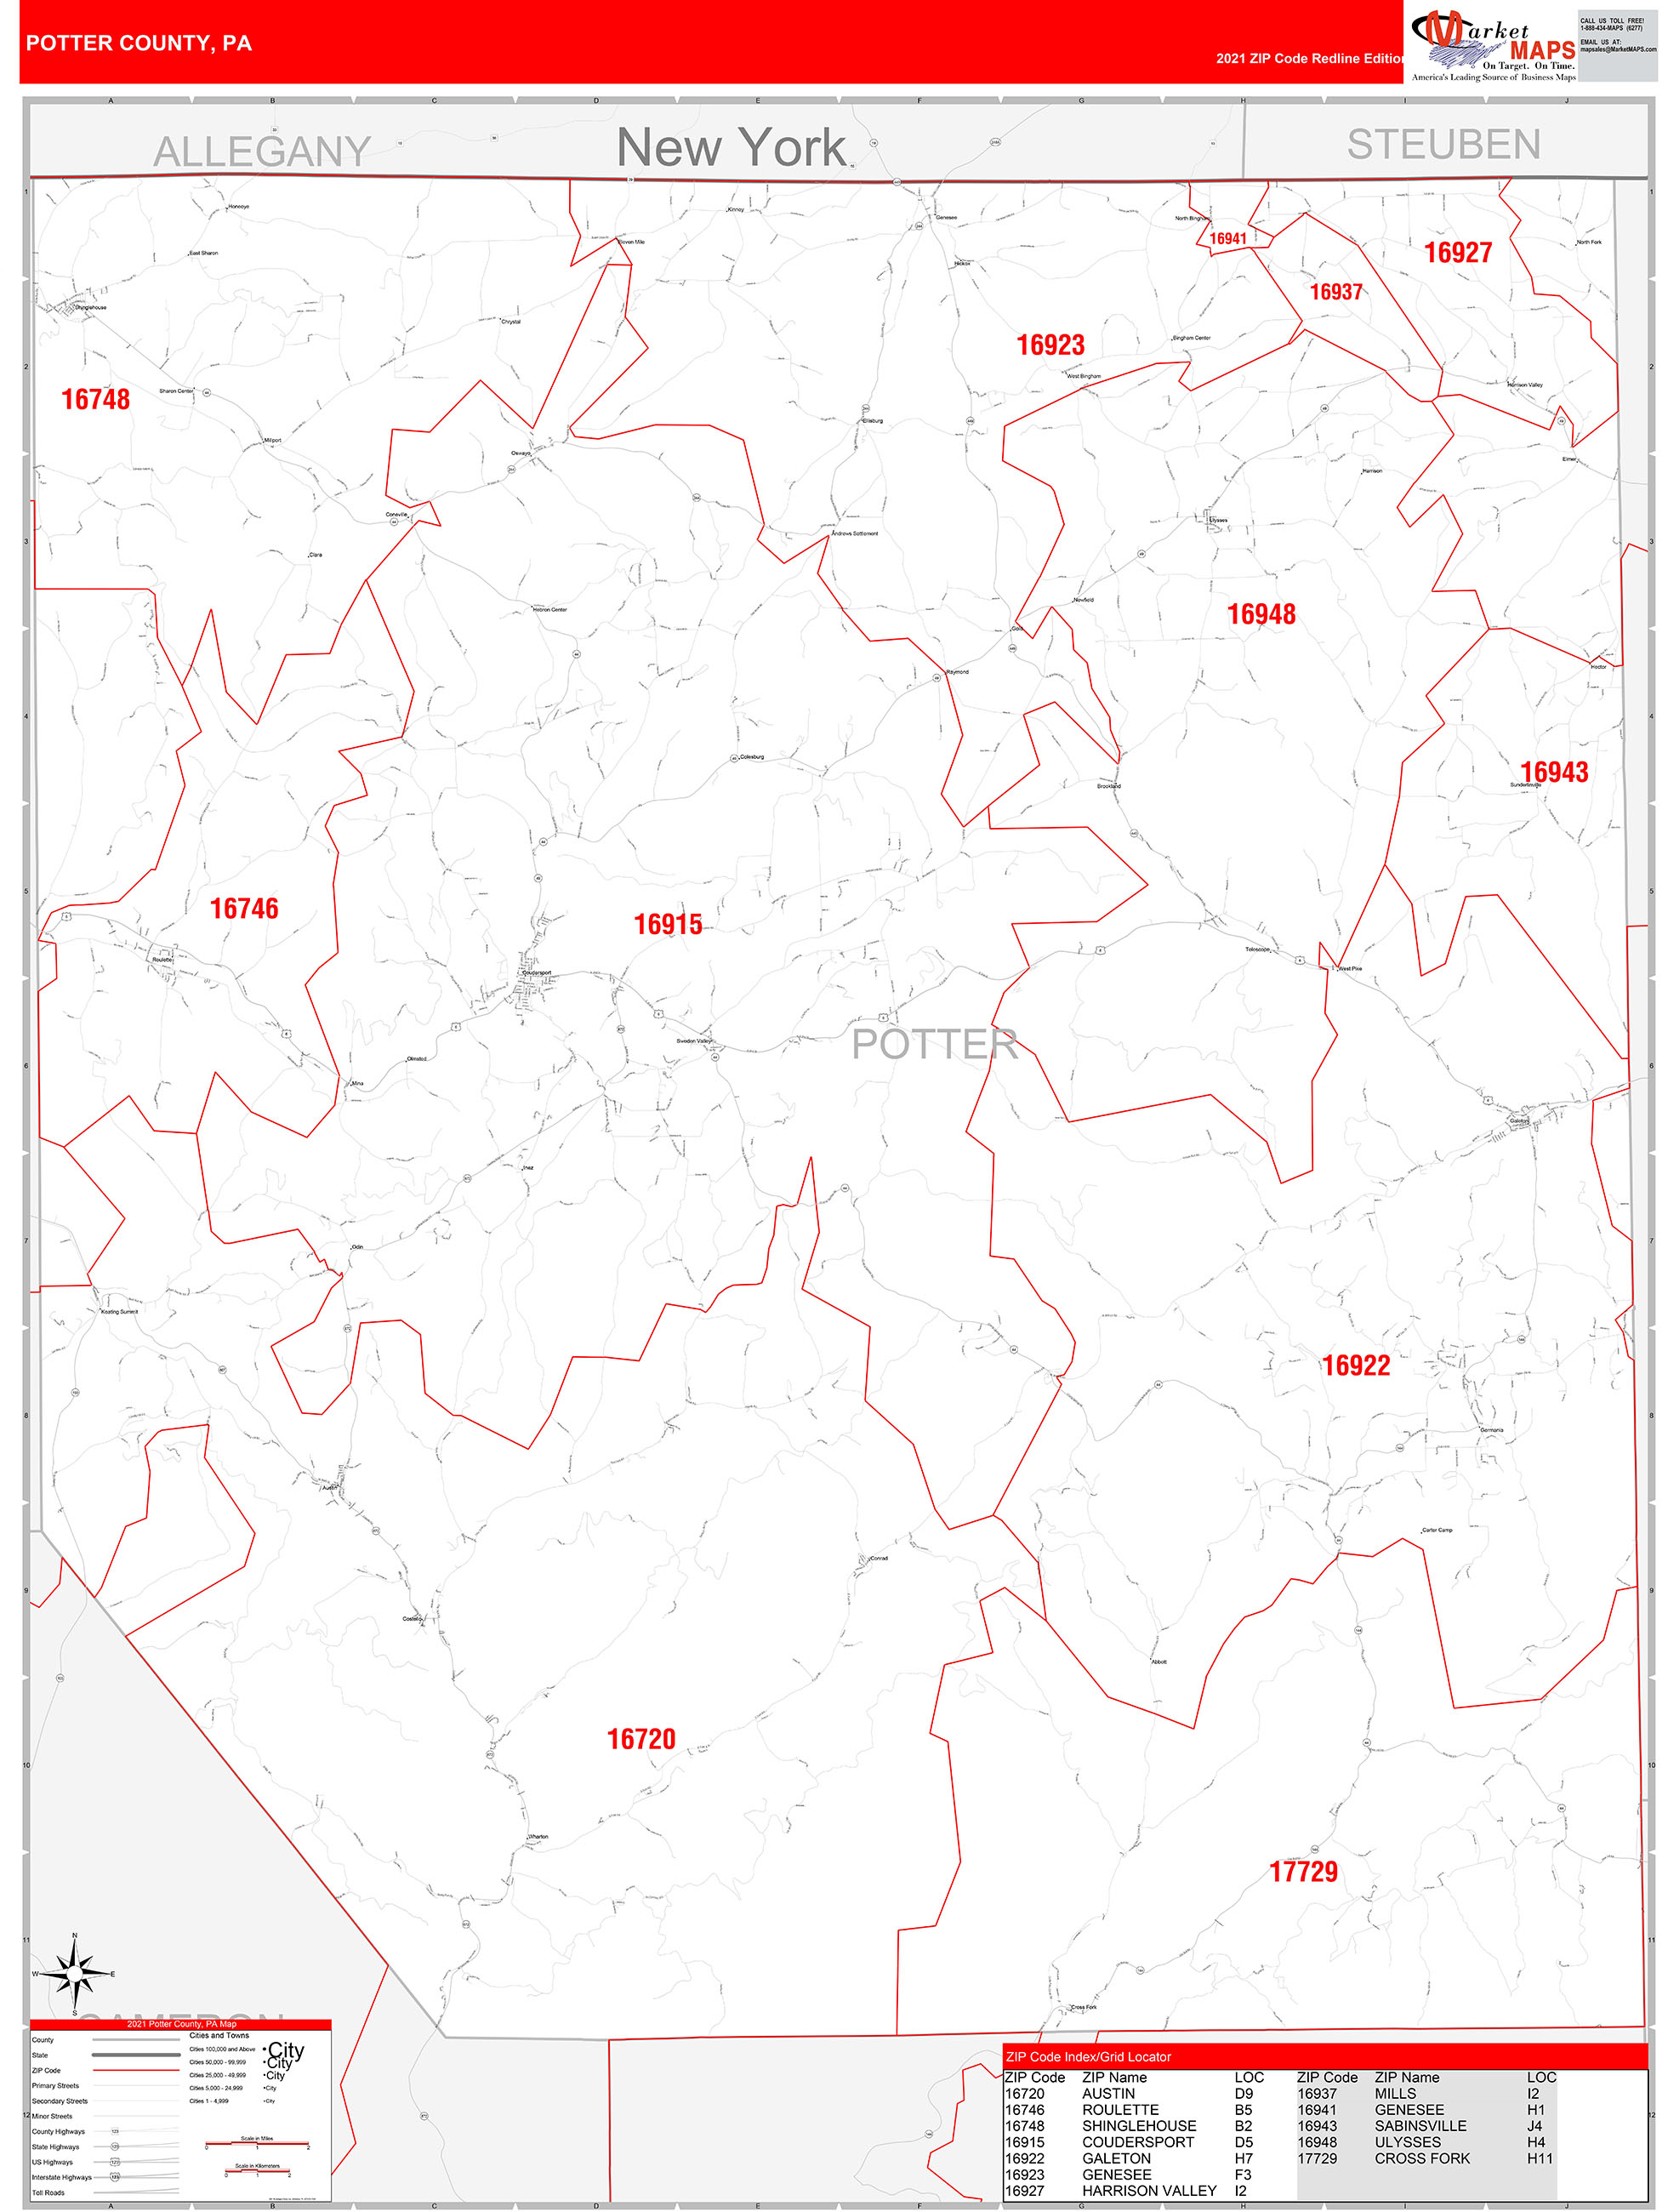 Potter County, PA Zip Code Wall Map Red Line Style by MarketMAPS